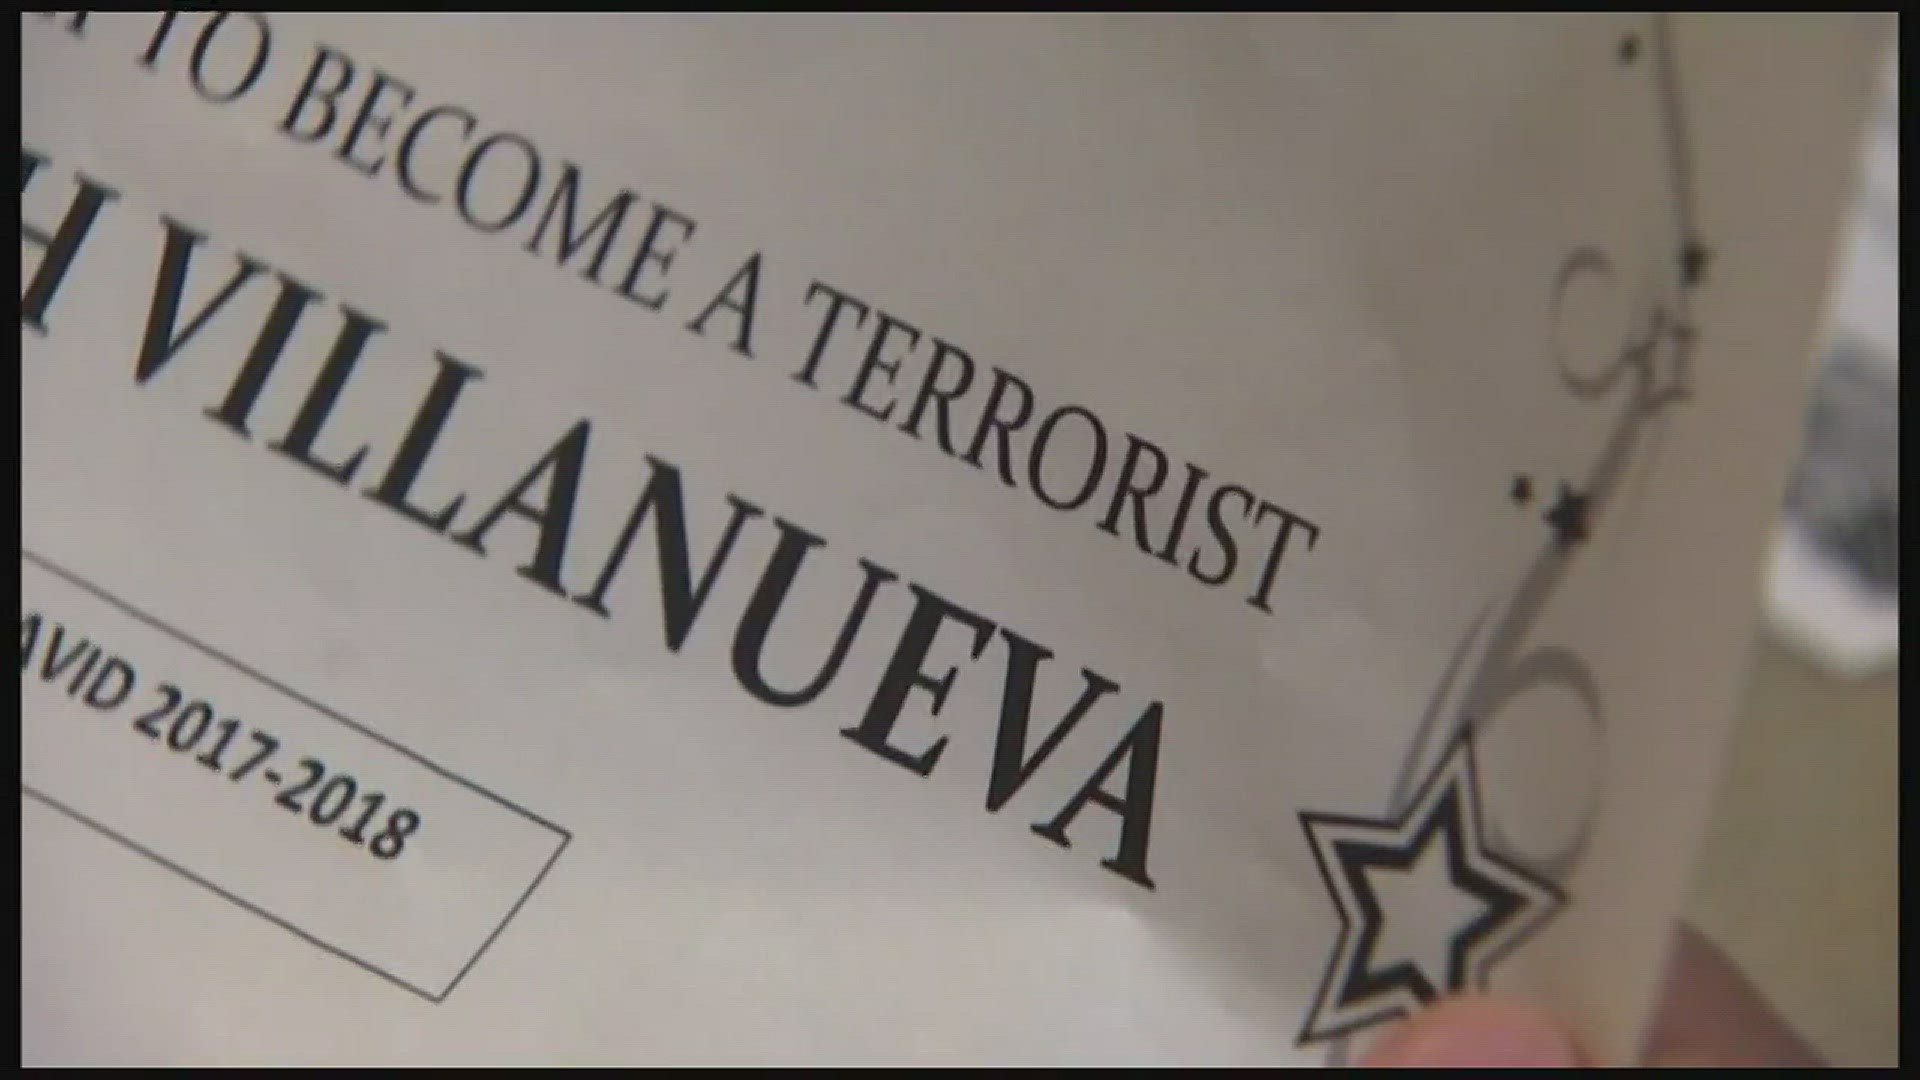 A teacher who named a student "most likely to become a terrorist" is no longer with Channelview ISD, district officials confirmed Tuesday.